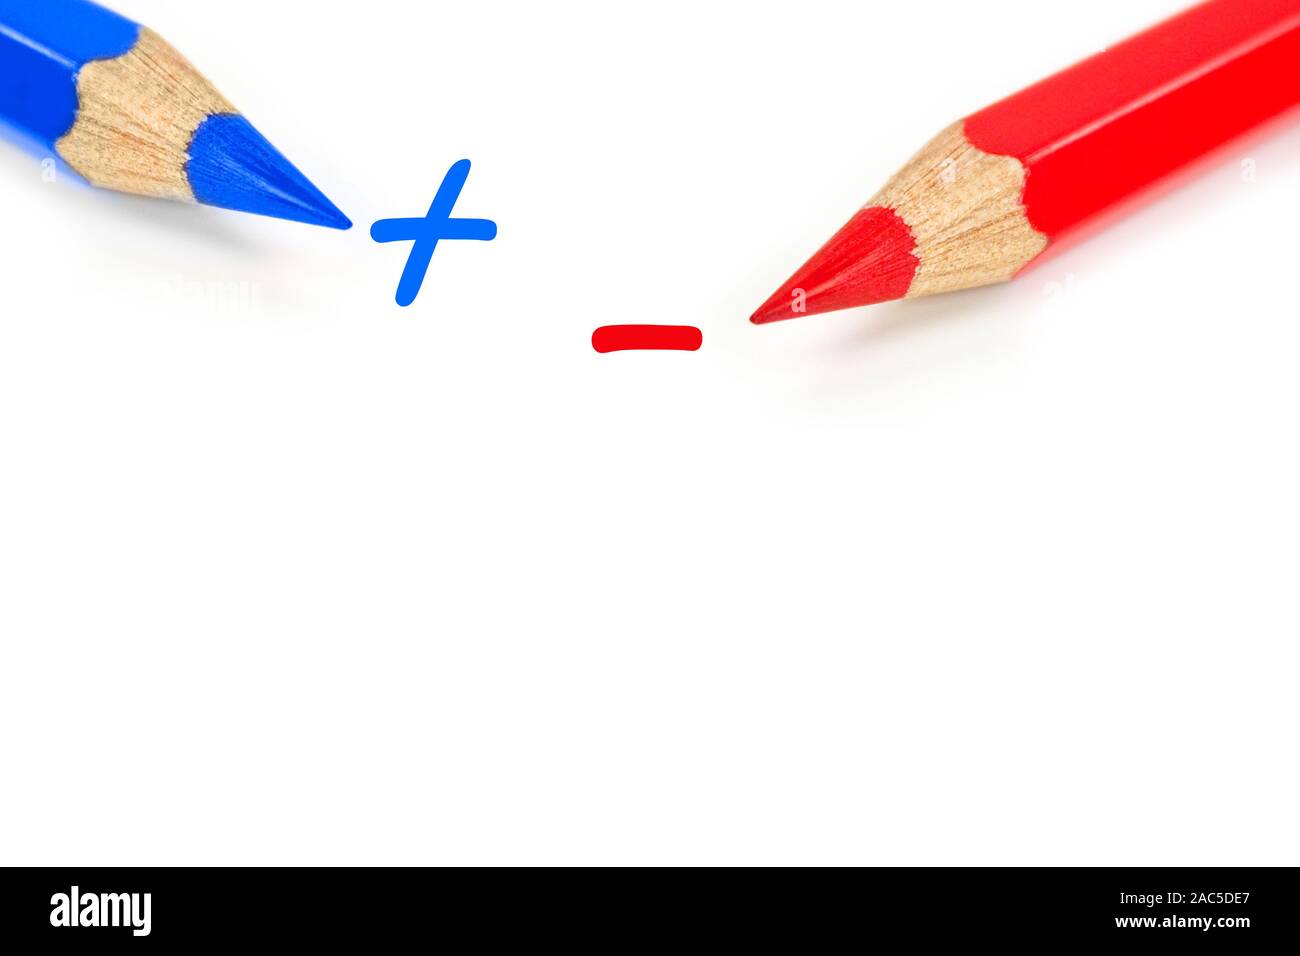 Red and blue pencil on white background Stock Photo